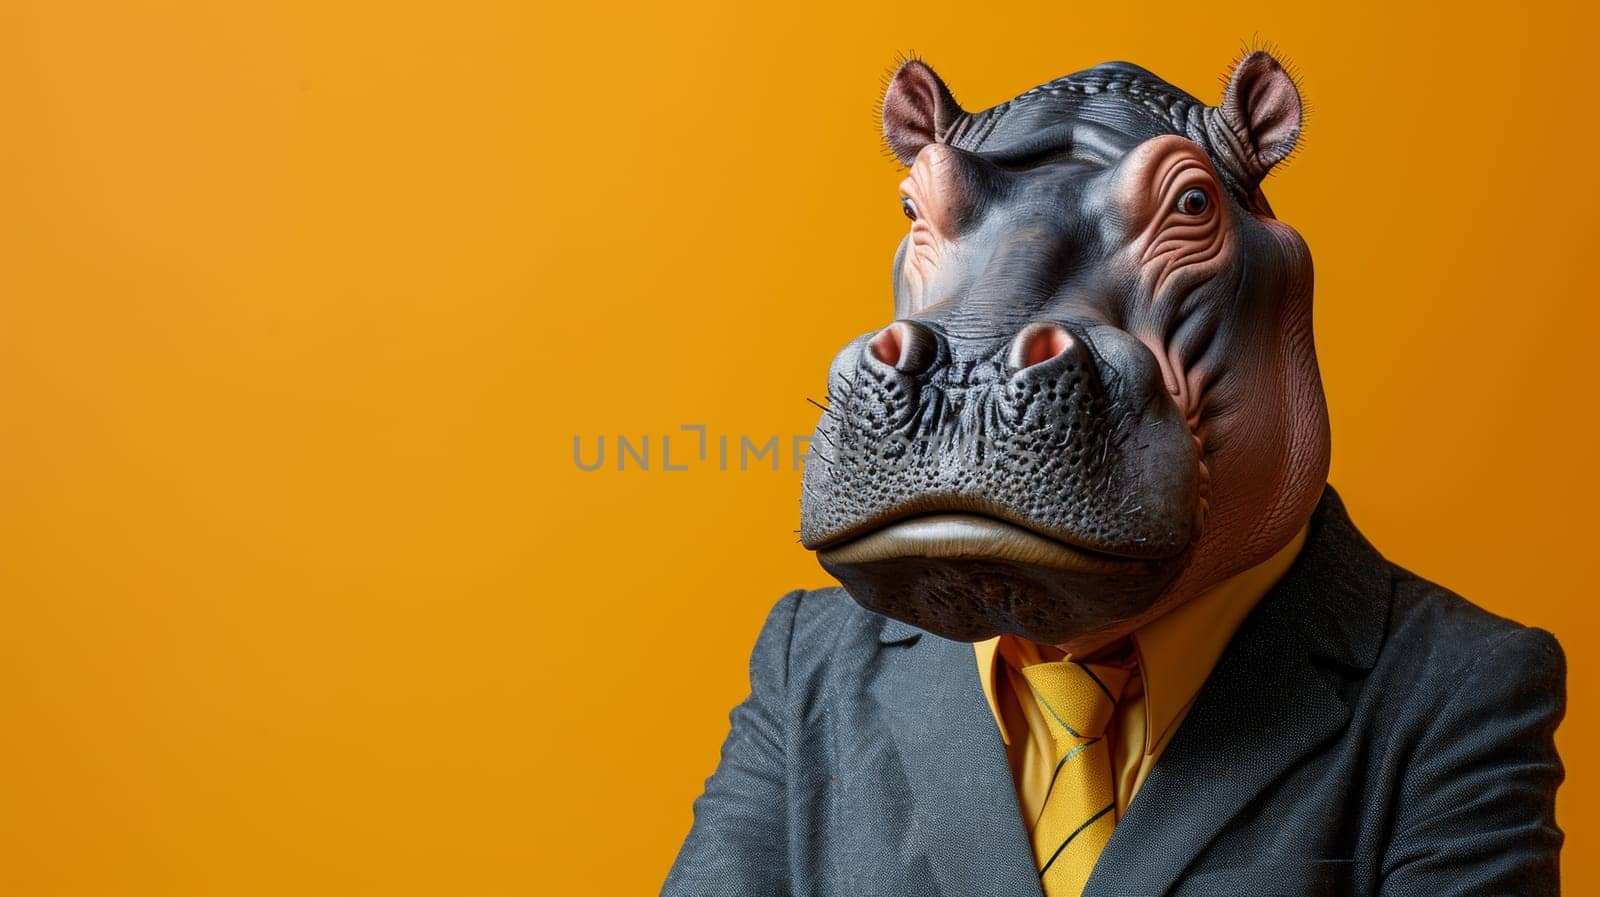 A man in a suit and tie with an animal head on